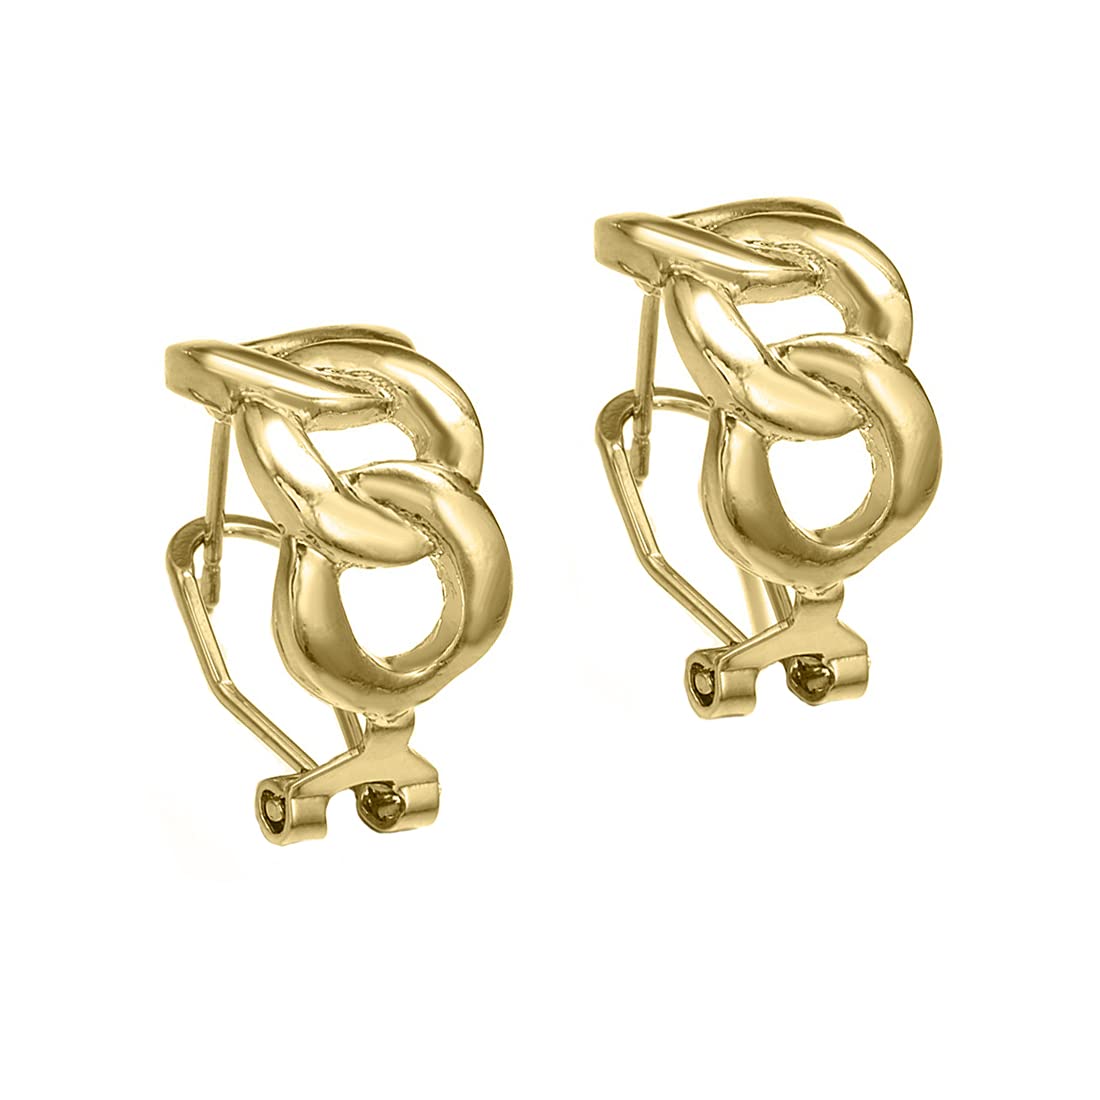 Yellow Chimes Latest Fashion Gold Plated Chain Design Clip-On Earrings for Women and Girls, Medium (YCFJER-CLPCHN-GL)